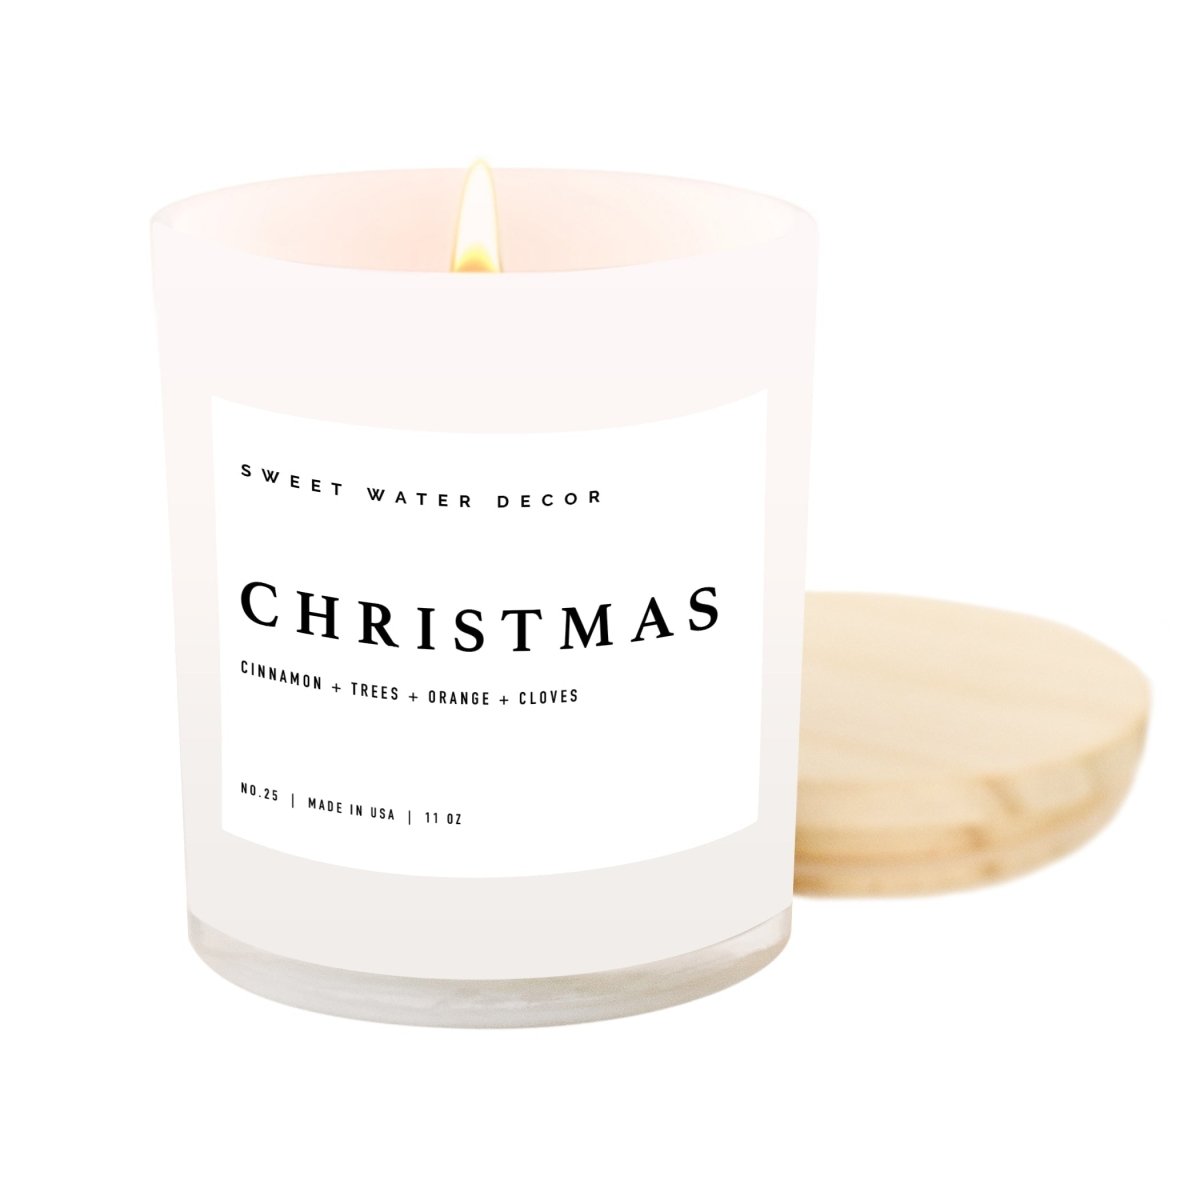 Sweet Water Decor Christmas Soy Candle - White Jar - 11 oz - lily & onyx